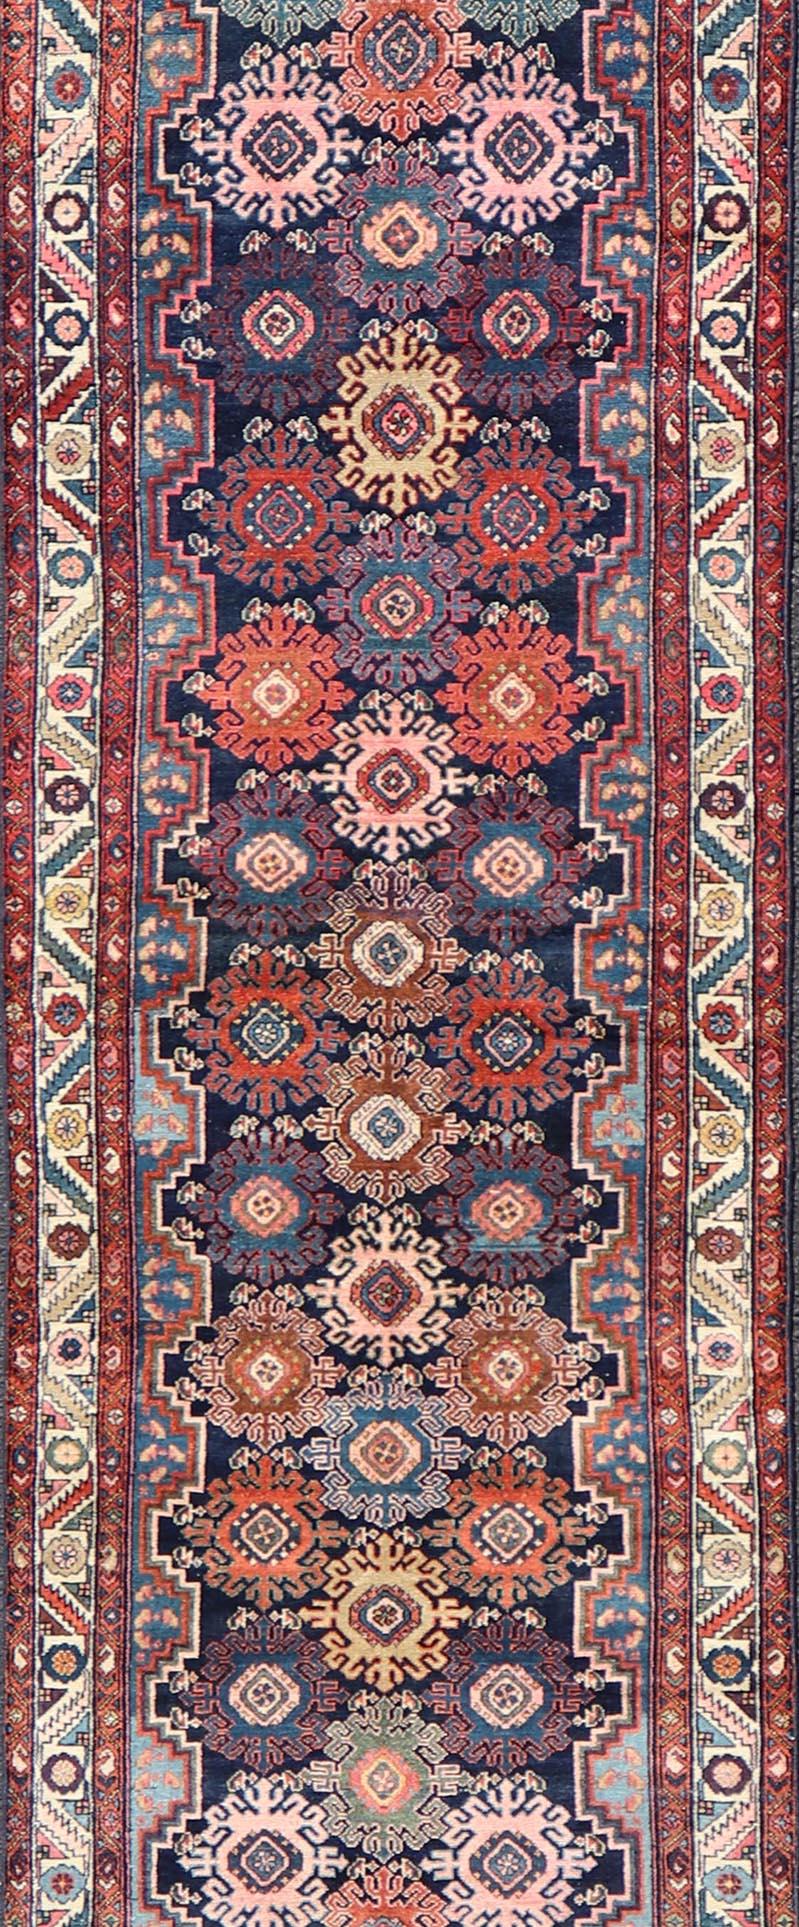 Antique Persian Hamadan Runner with All-Over Geometric Motifs In Jewel Tones For Sale 1